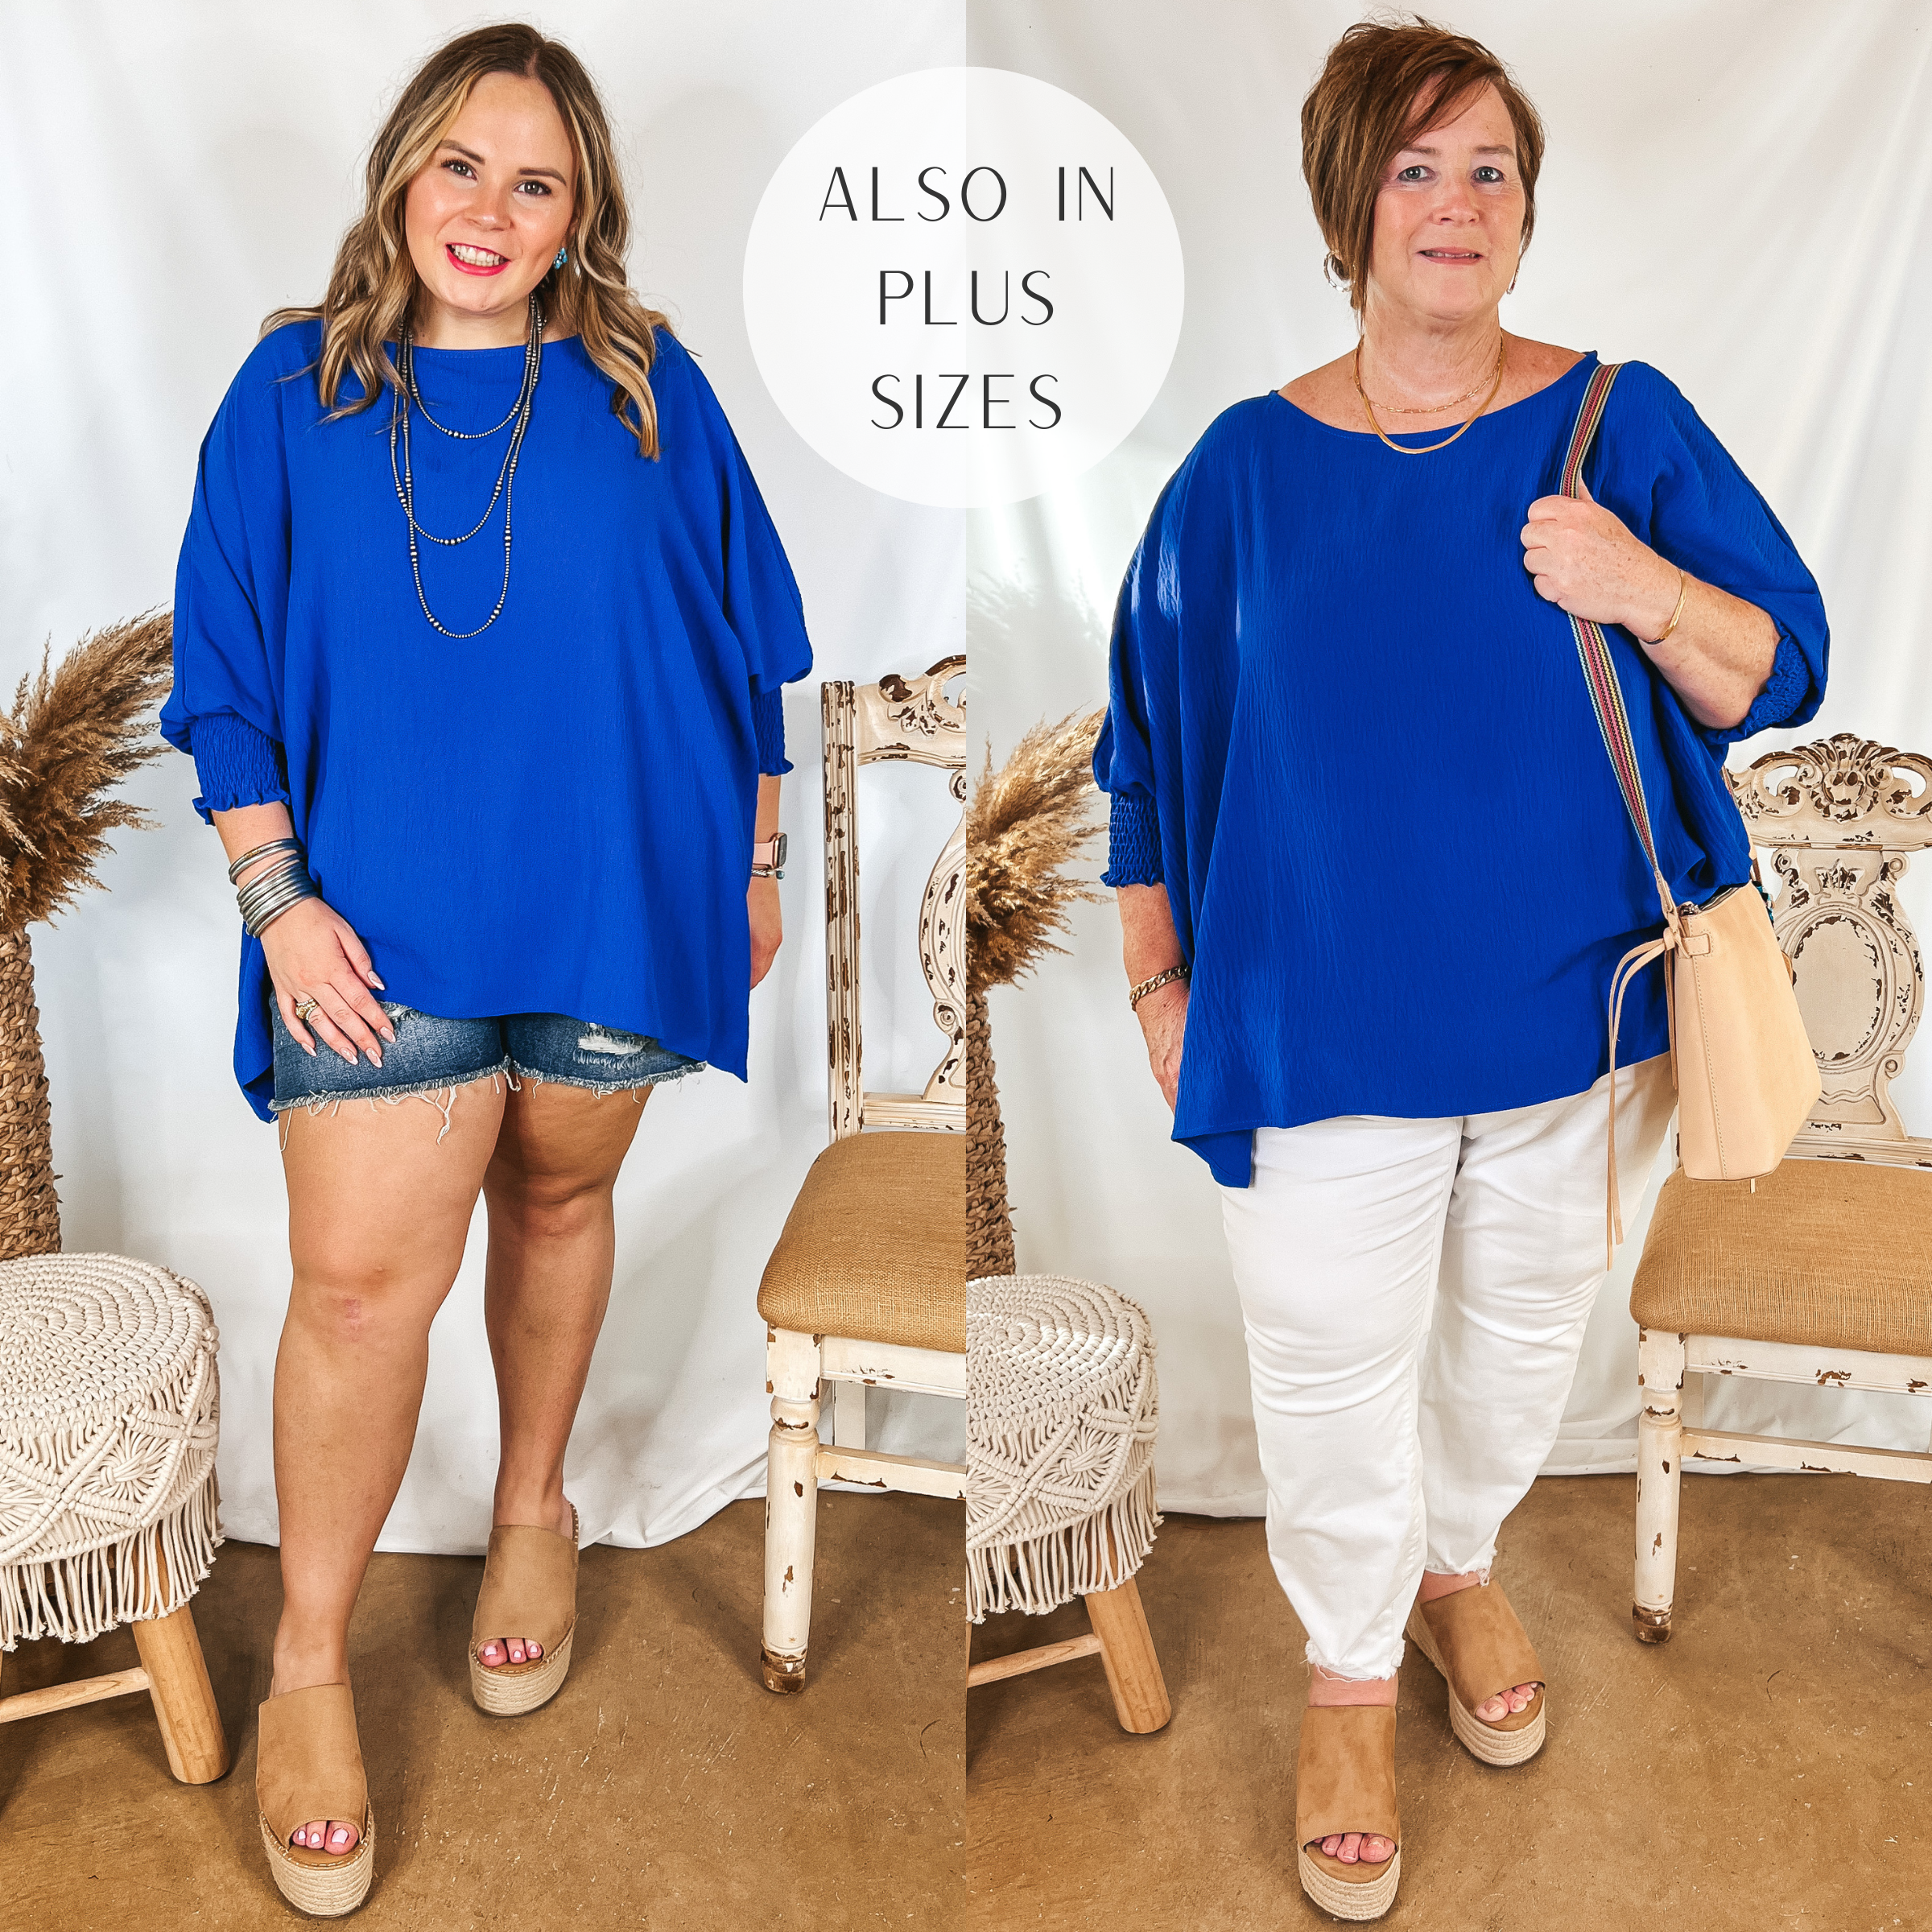 Models are wearing a royal blue oversized top with 3/4 sleeves. Size large model has it paired with denim shorts, tan wedges, and silver jewelry. Plus size model has it paired with white skinny jeans, tan wedges, and gold jewelry.